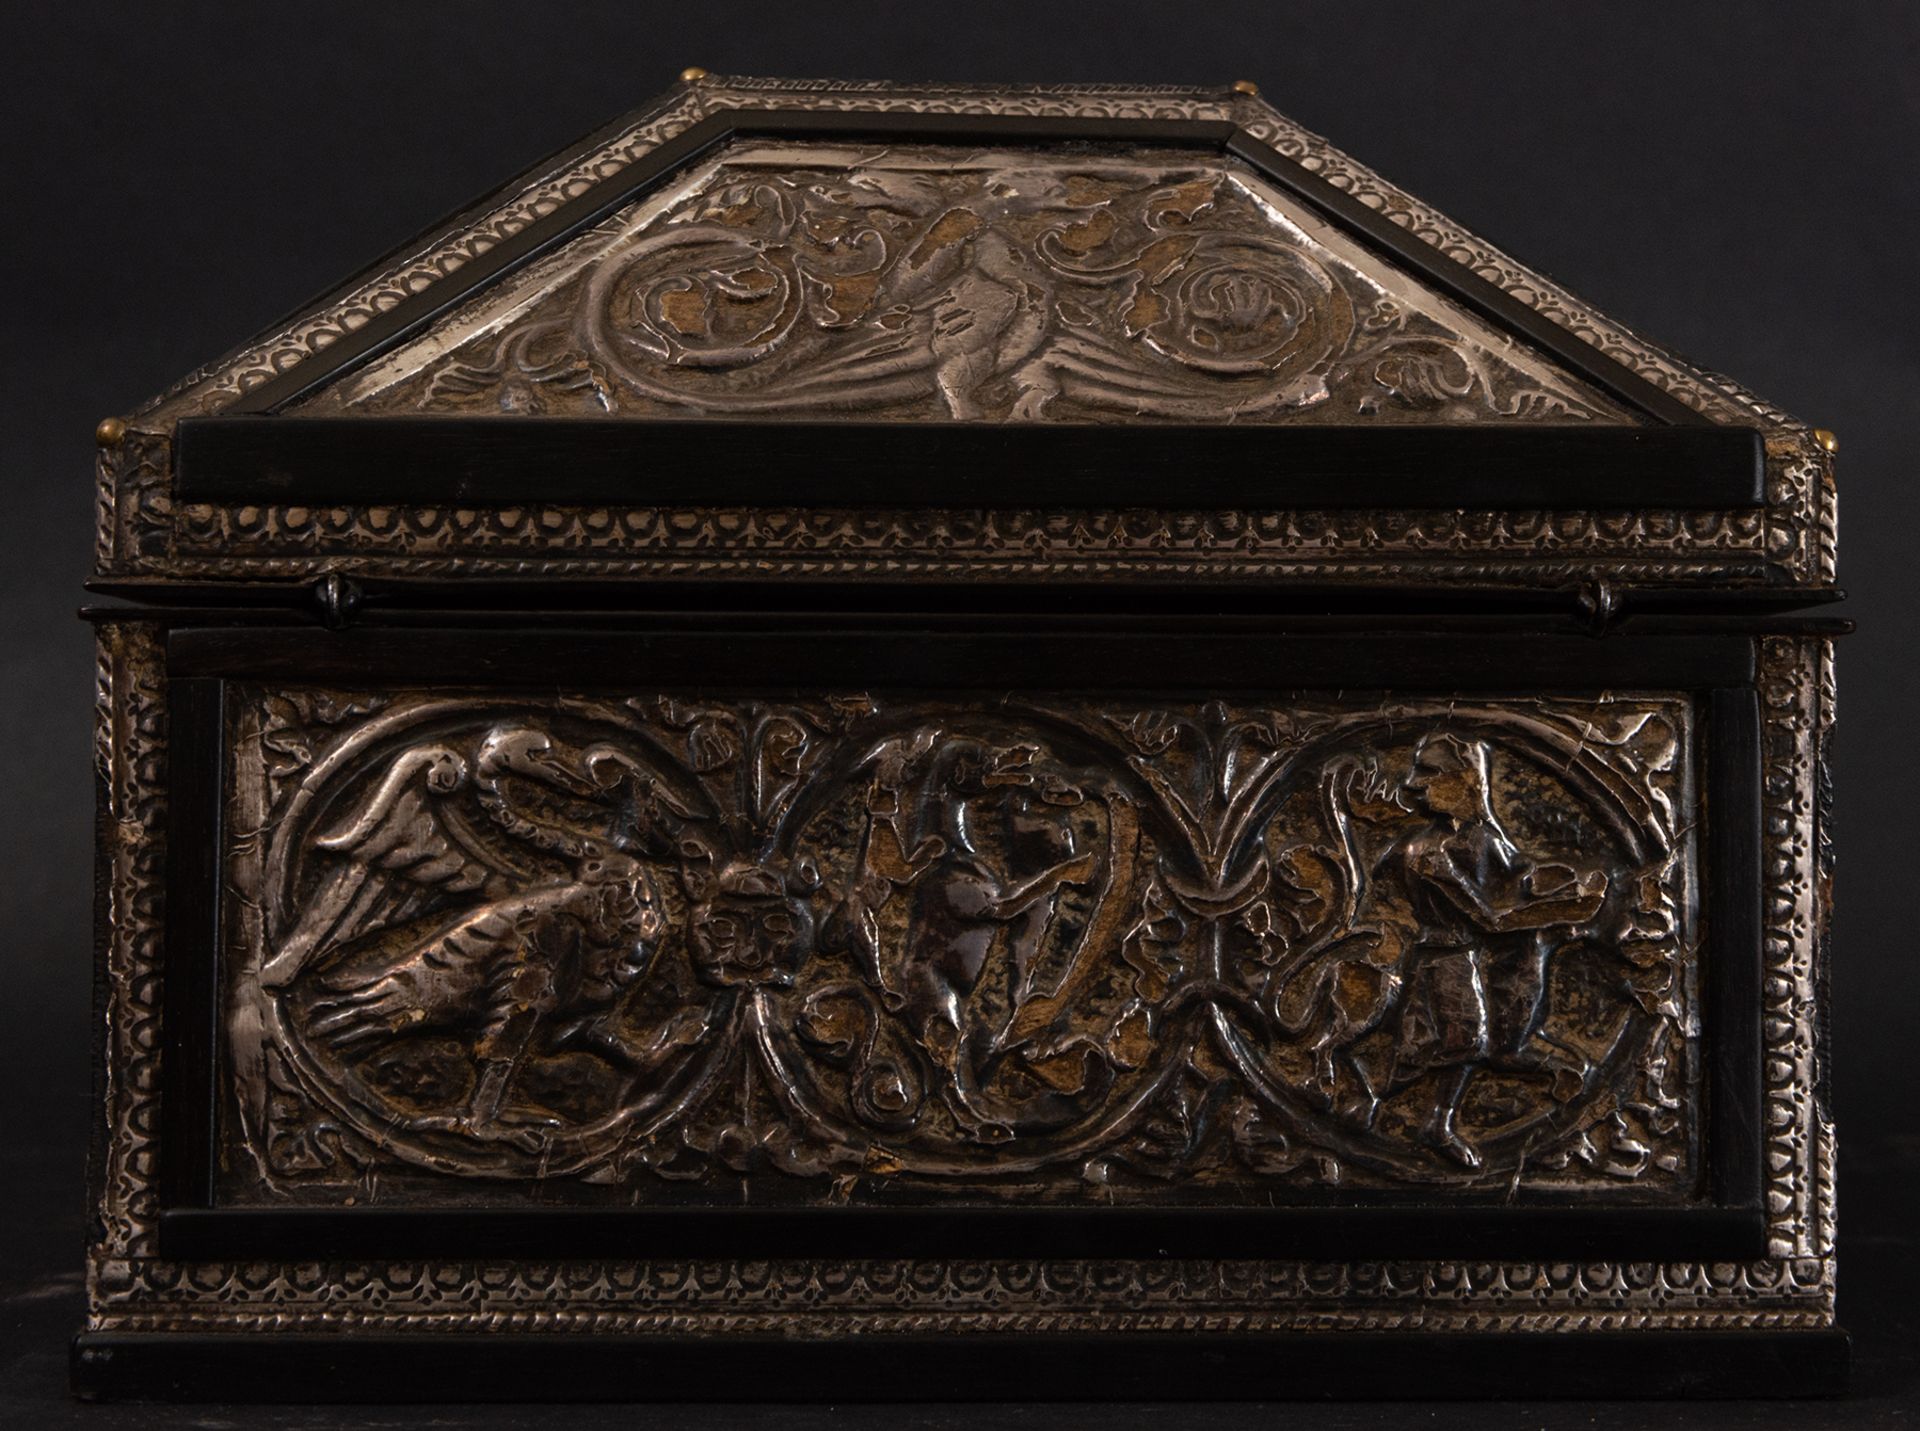 Italian Renaissance chest in embossed silver and ebony marquetry - Image 3 of 3